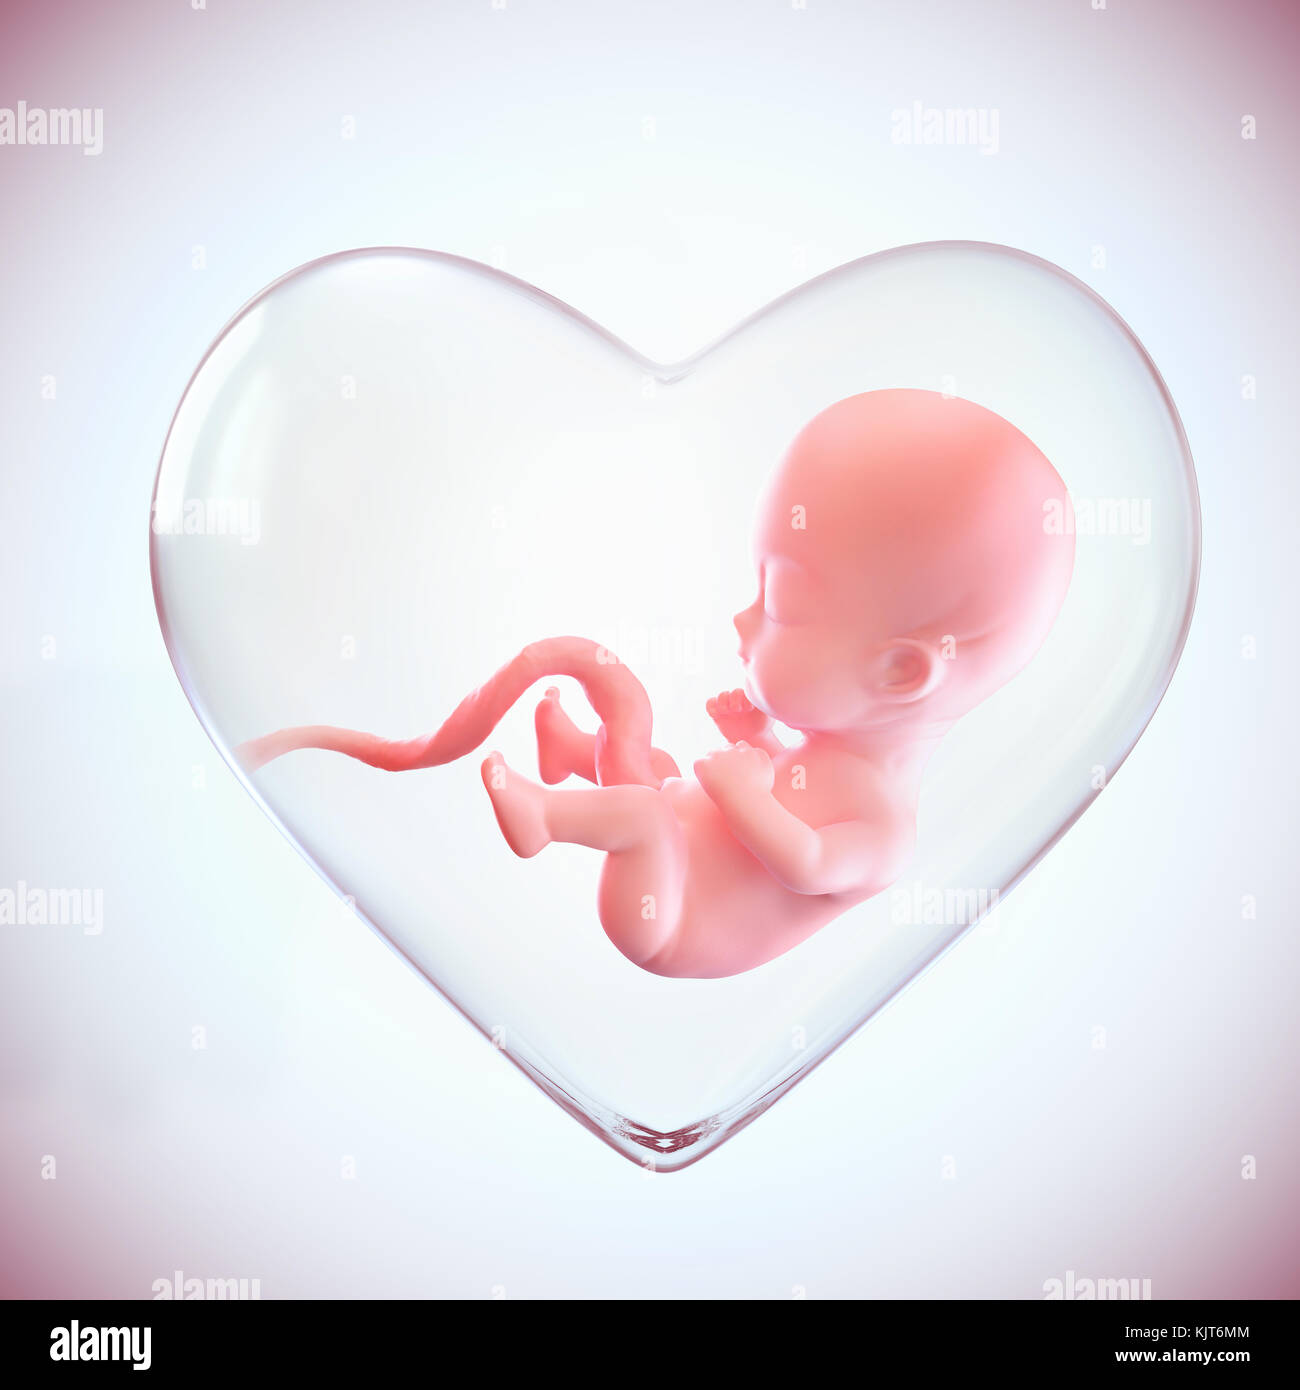 fetus inside the heart shape of womb, Love of mother concept, medically accurate 3d illustration of a fetus in week with Clipping path. Stock Photo